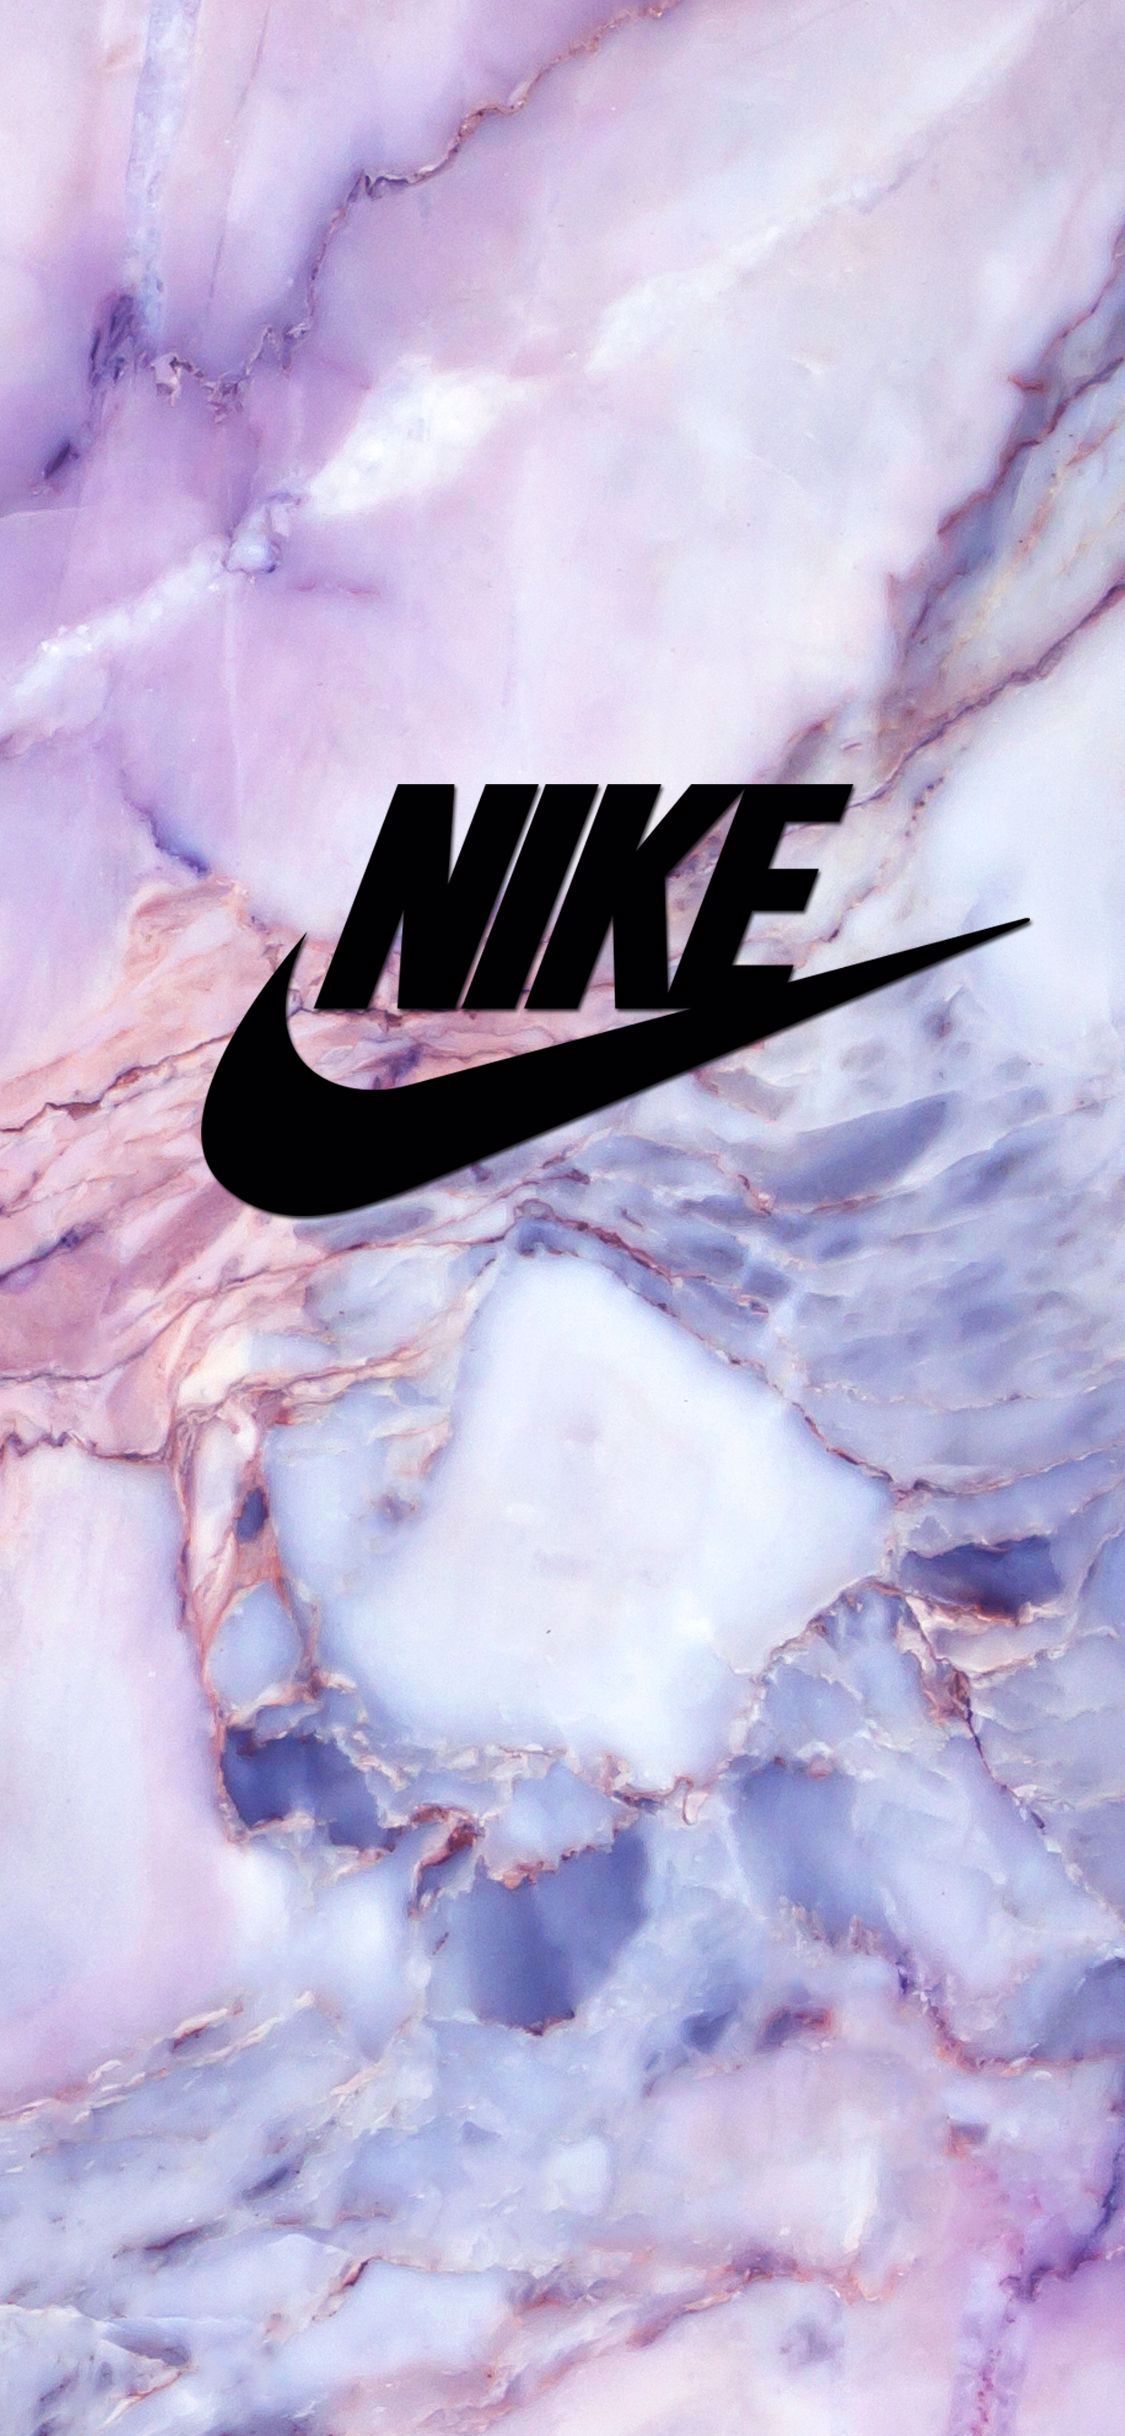 Nike iPhone X wallpaper. You can order iphone case with this picture. Just click on picture :). Hipster iphone cases, Girl iphone wallpaper, Nike iphone cases